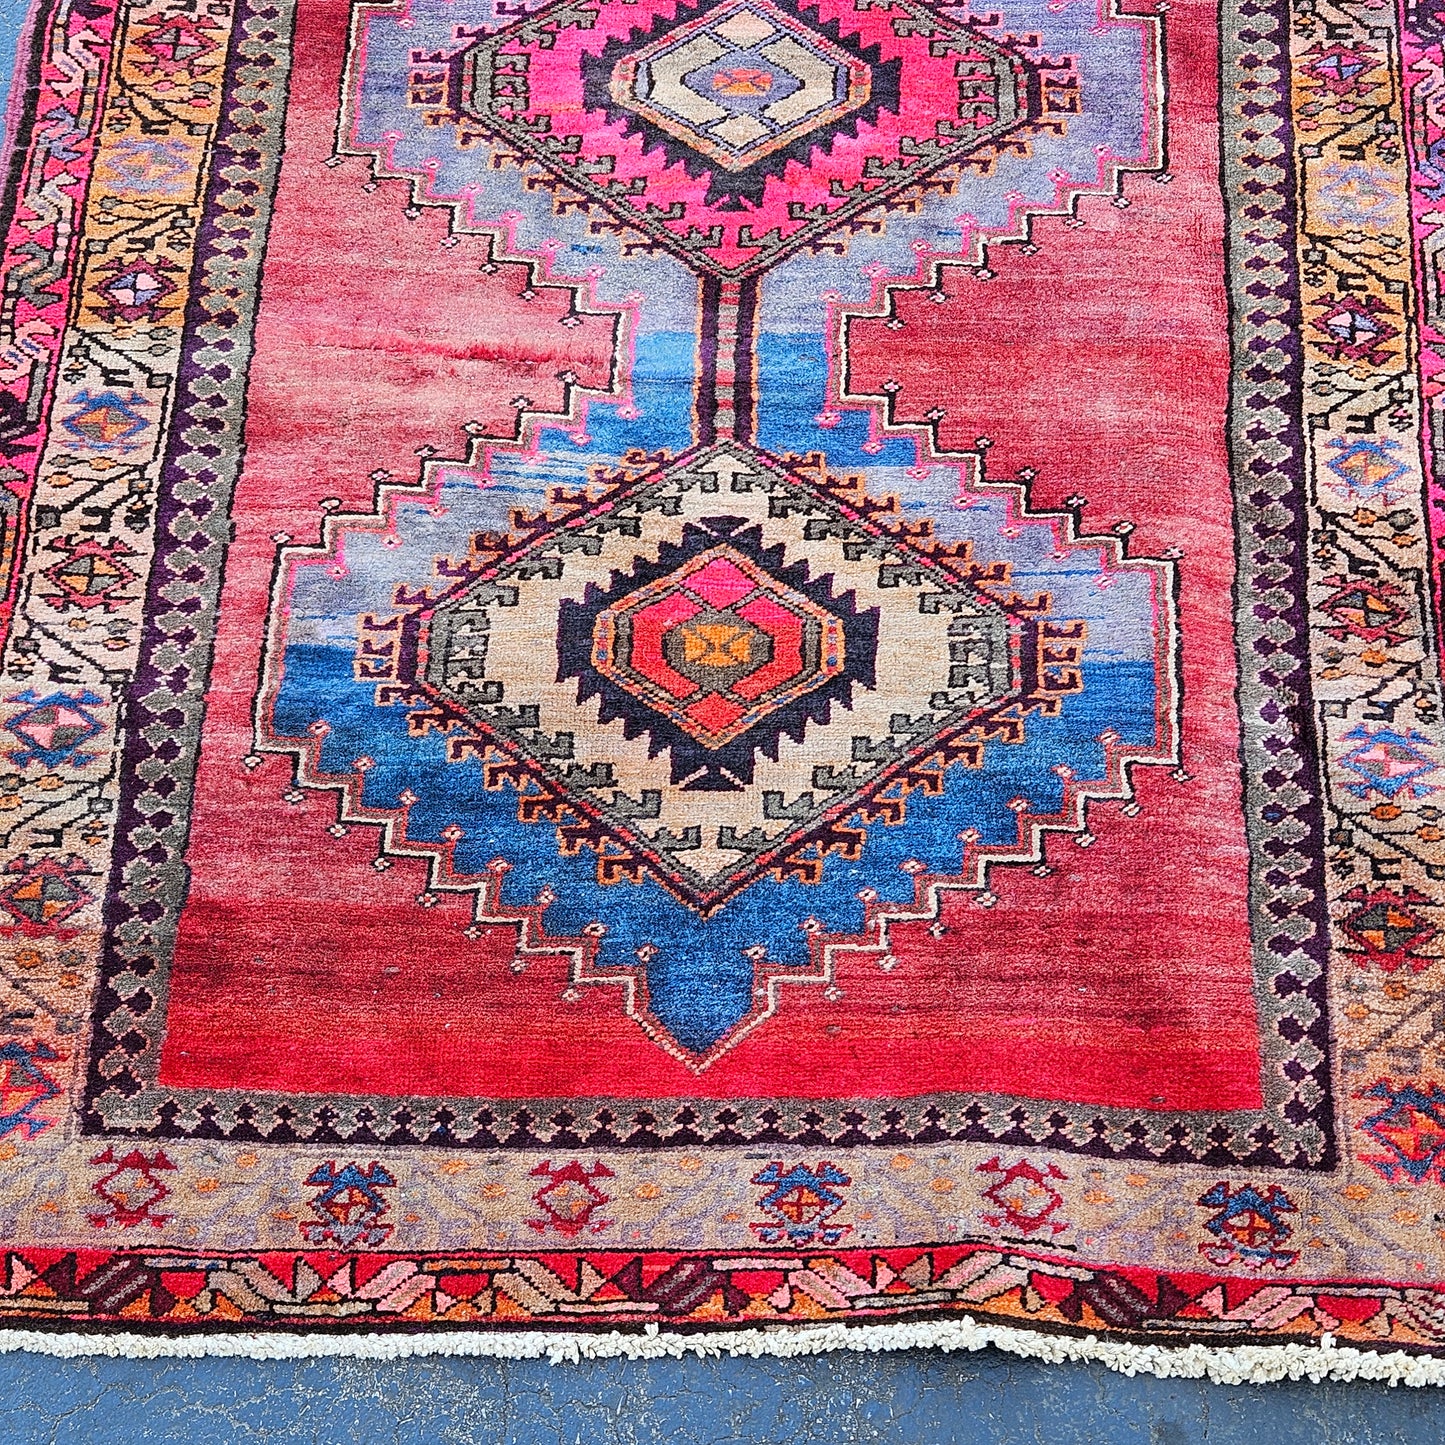 Antique 100% Wool Hand Knotted Red Runner Rug - 3' 10" x 8' 4"